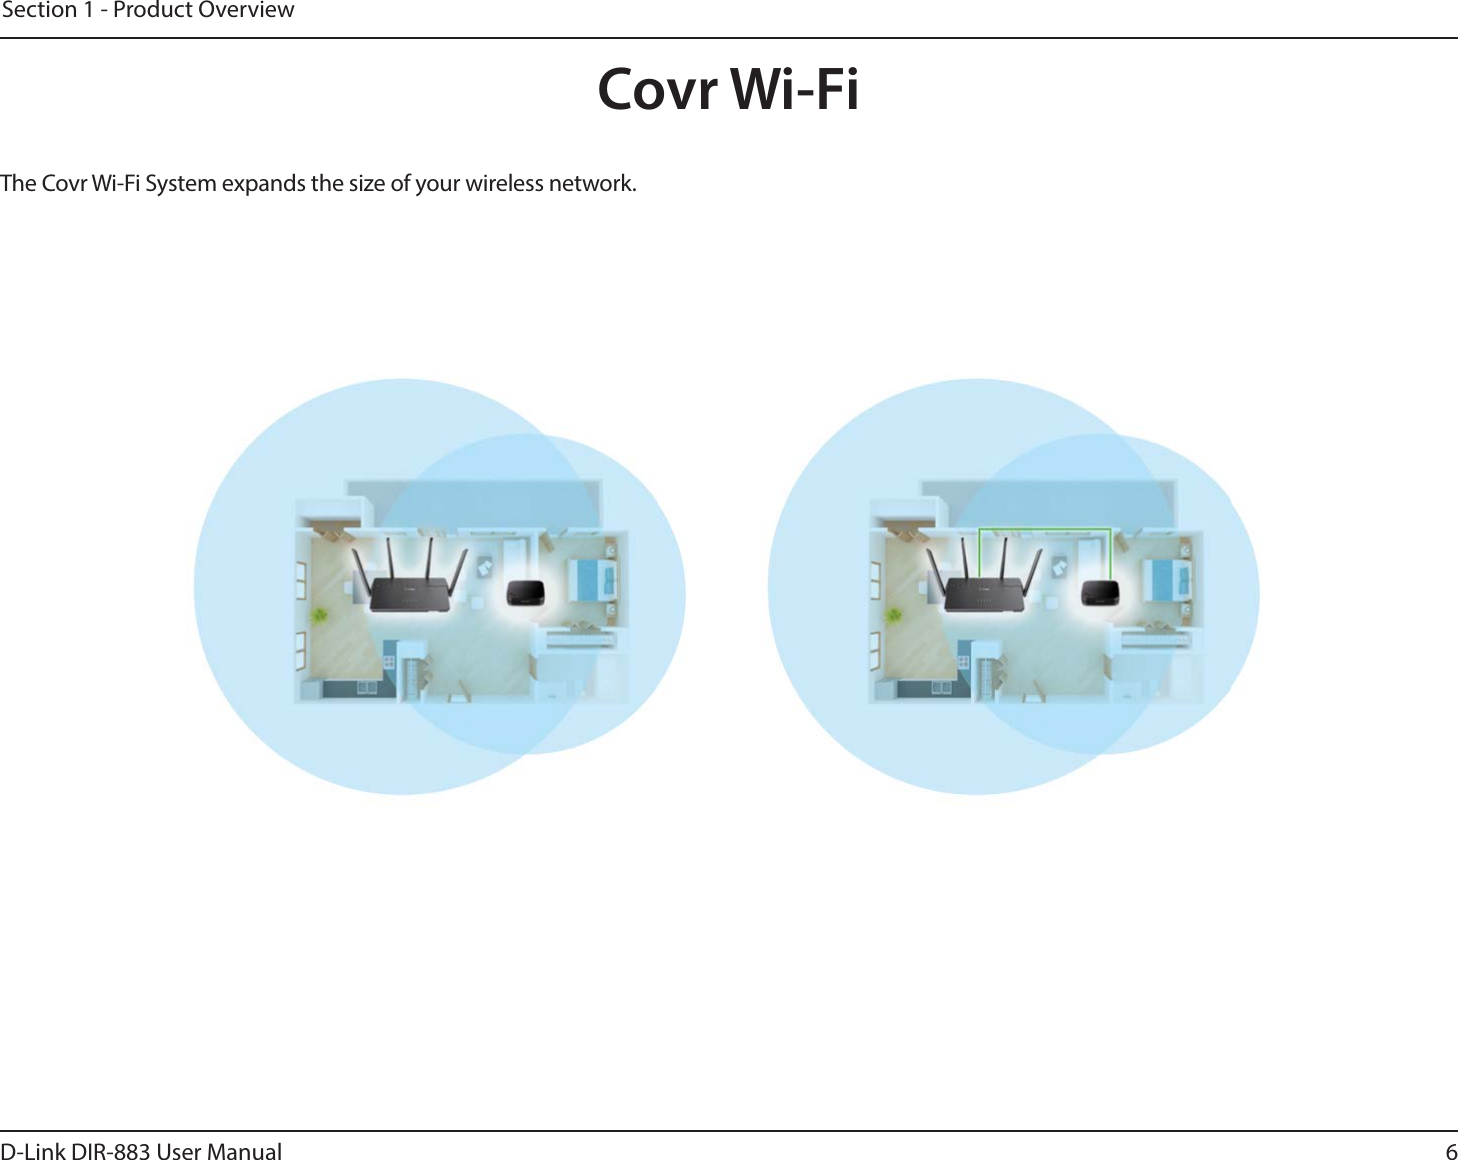 6D-Link DIR-883 User ManualSection 1 - Product OverviewCovr Wi-FiThe Covr Wi-Fi System expands the size of your wireless network.